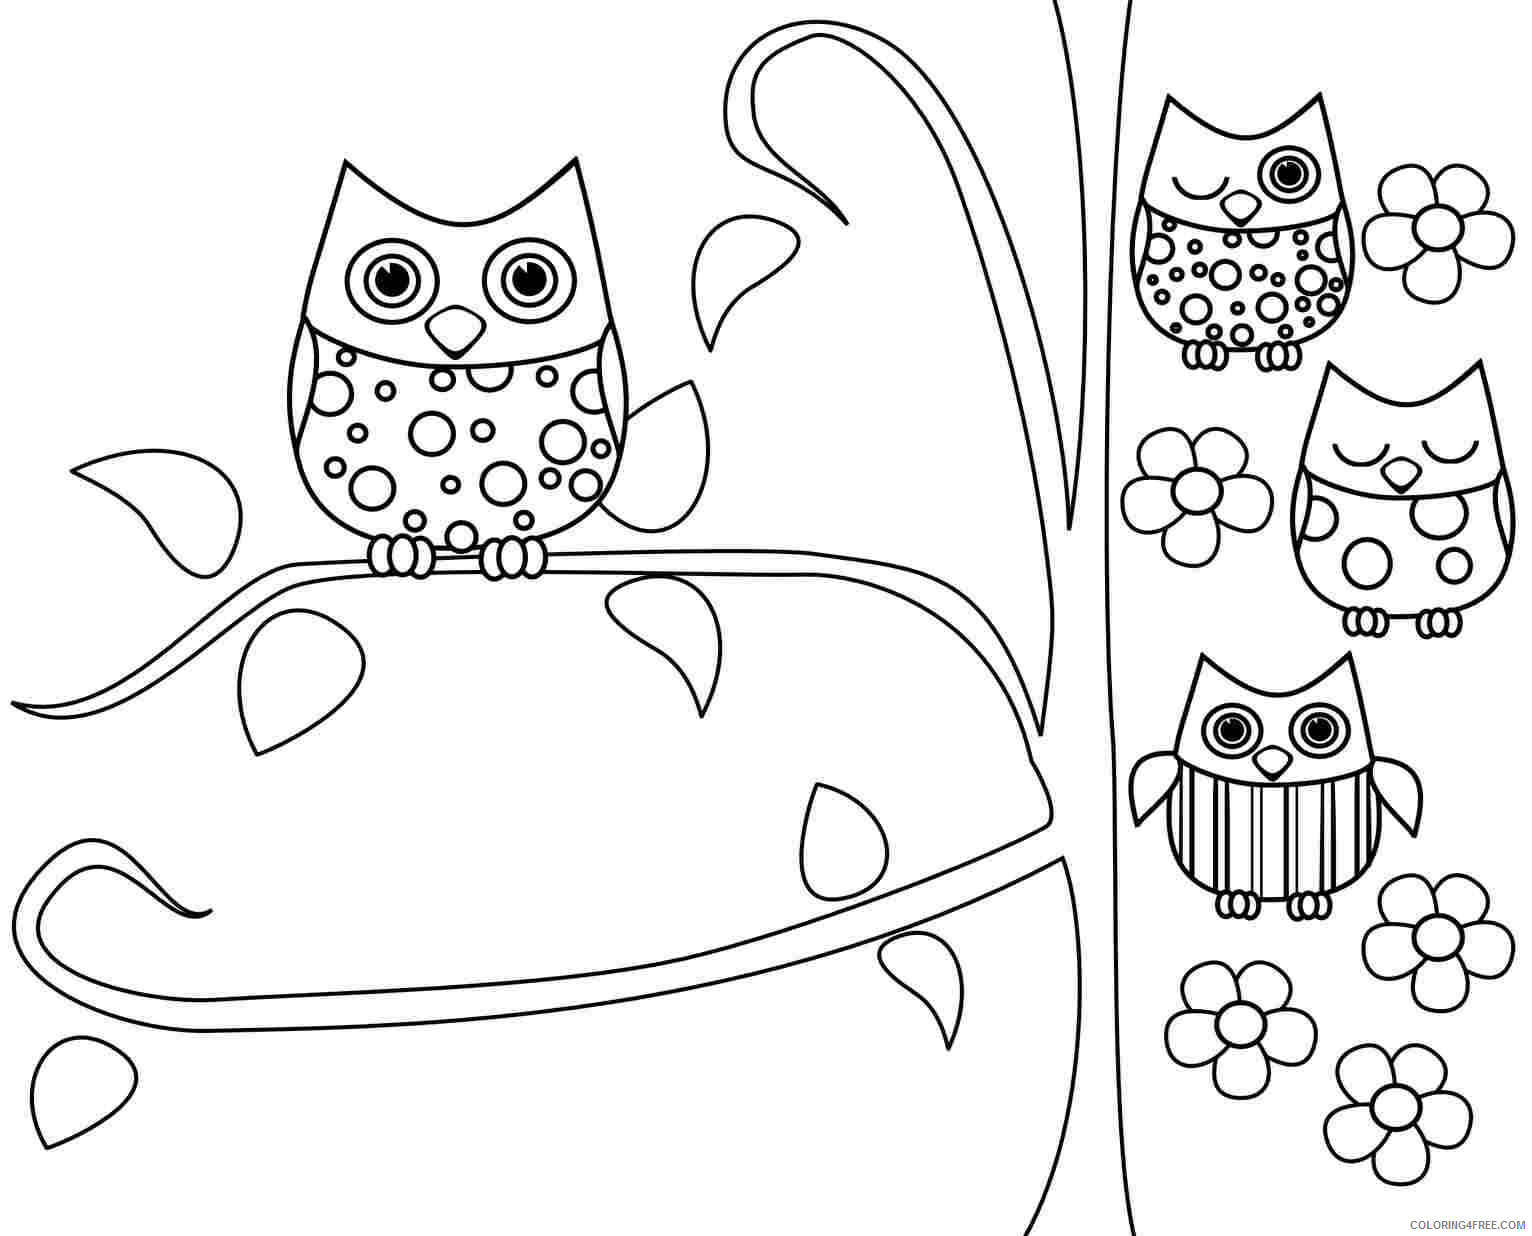 Owl Coloring Sheets Animal Coloring Pages Printable 2021 3039 Coloring4free